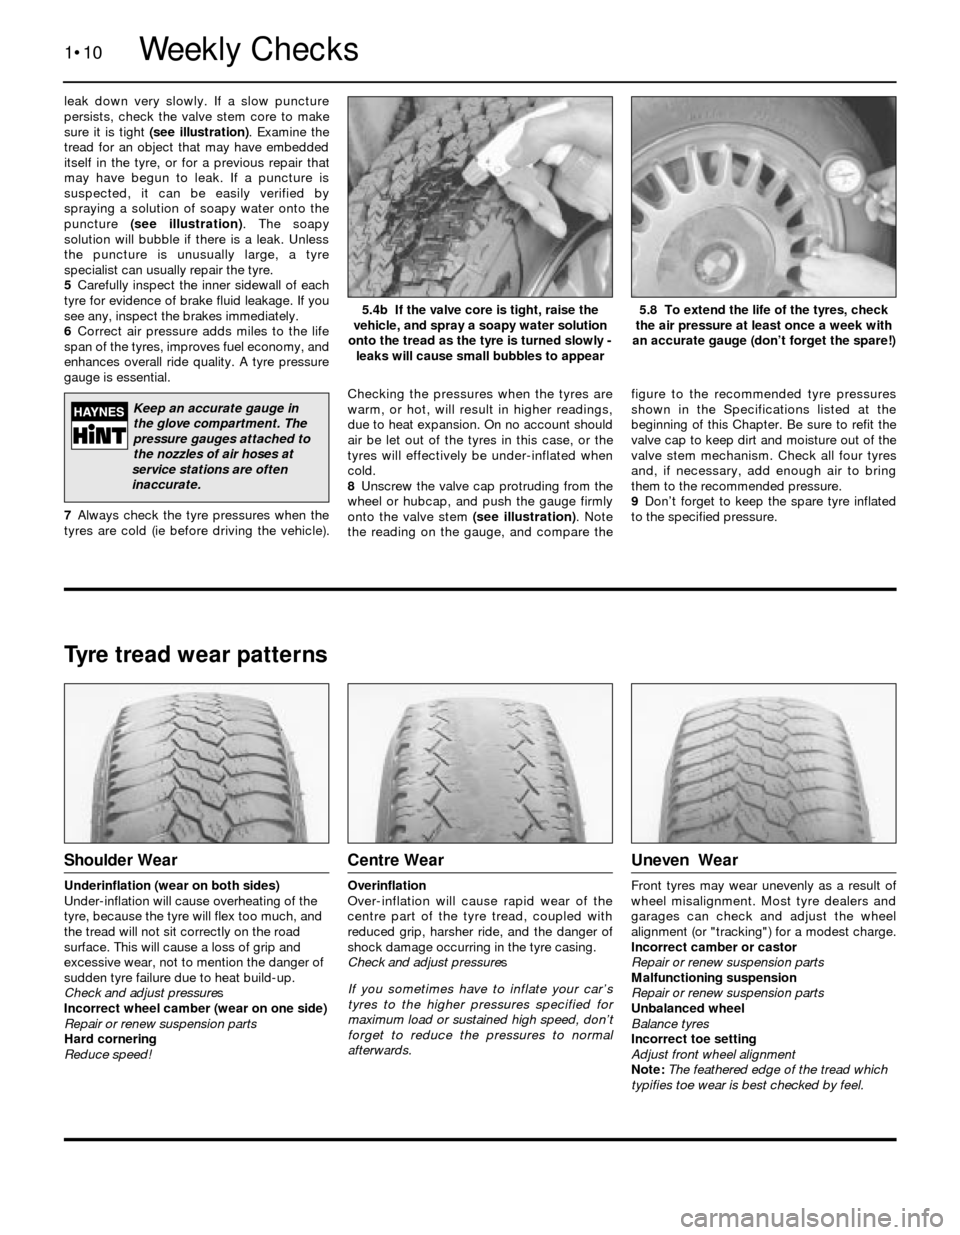 BMW 3 SERIES 1987 E30 Workshop Manual leak down very slowly. If a slow puncture
persists, check the valve stem core to make
sure it is tight (see illustration). Examine the
tread for an object that may have embedded
itself in the tyre, or